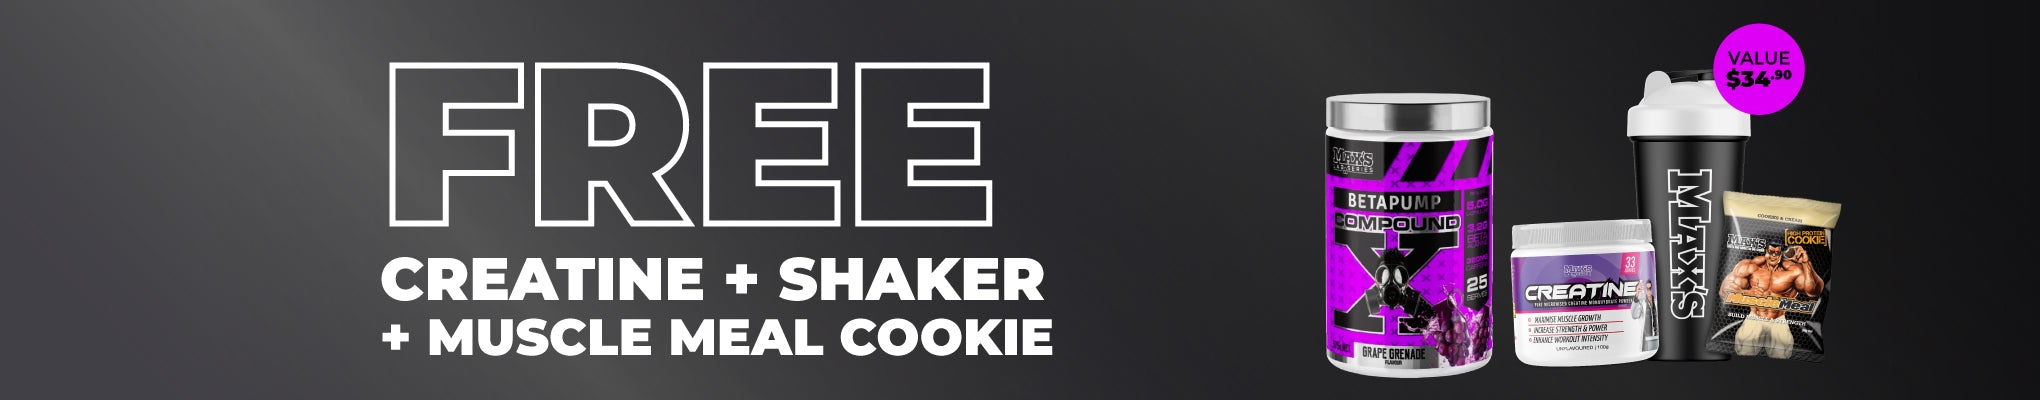 Max's Online Deal - FREE Creatine, Shaker, Cookie